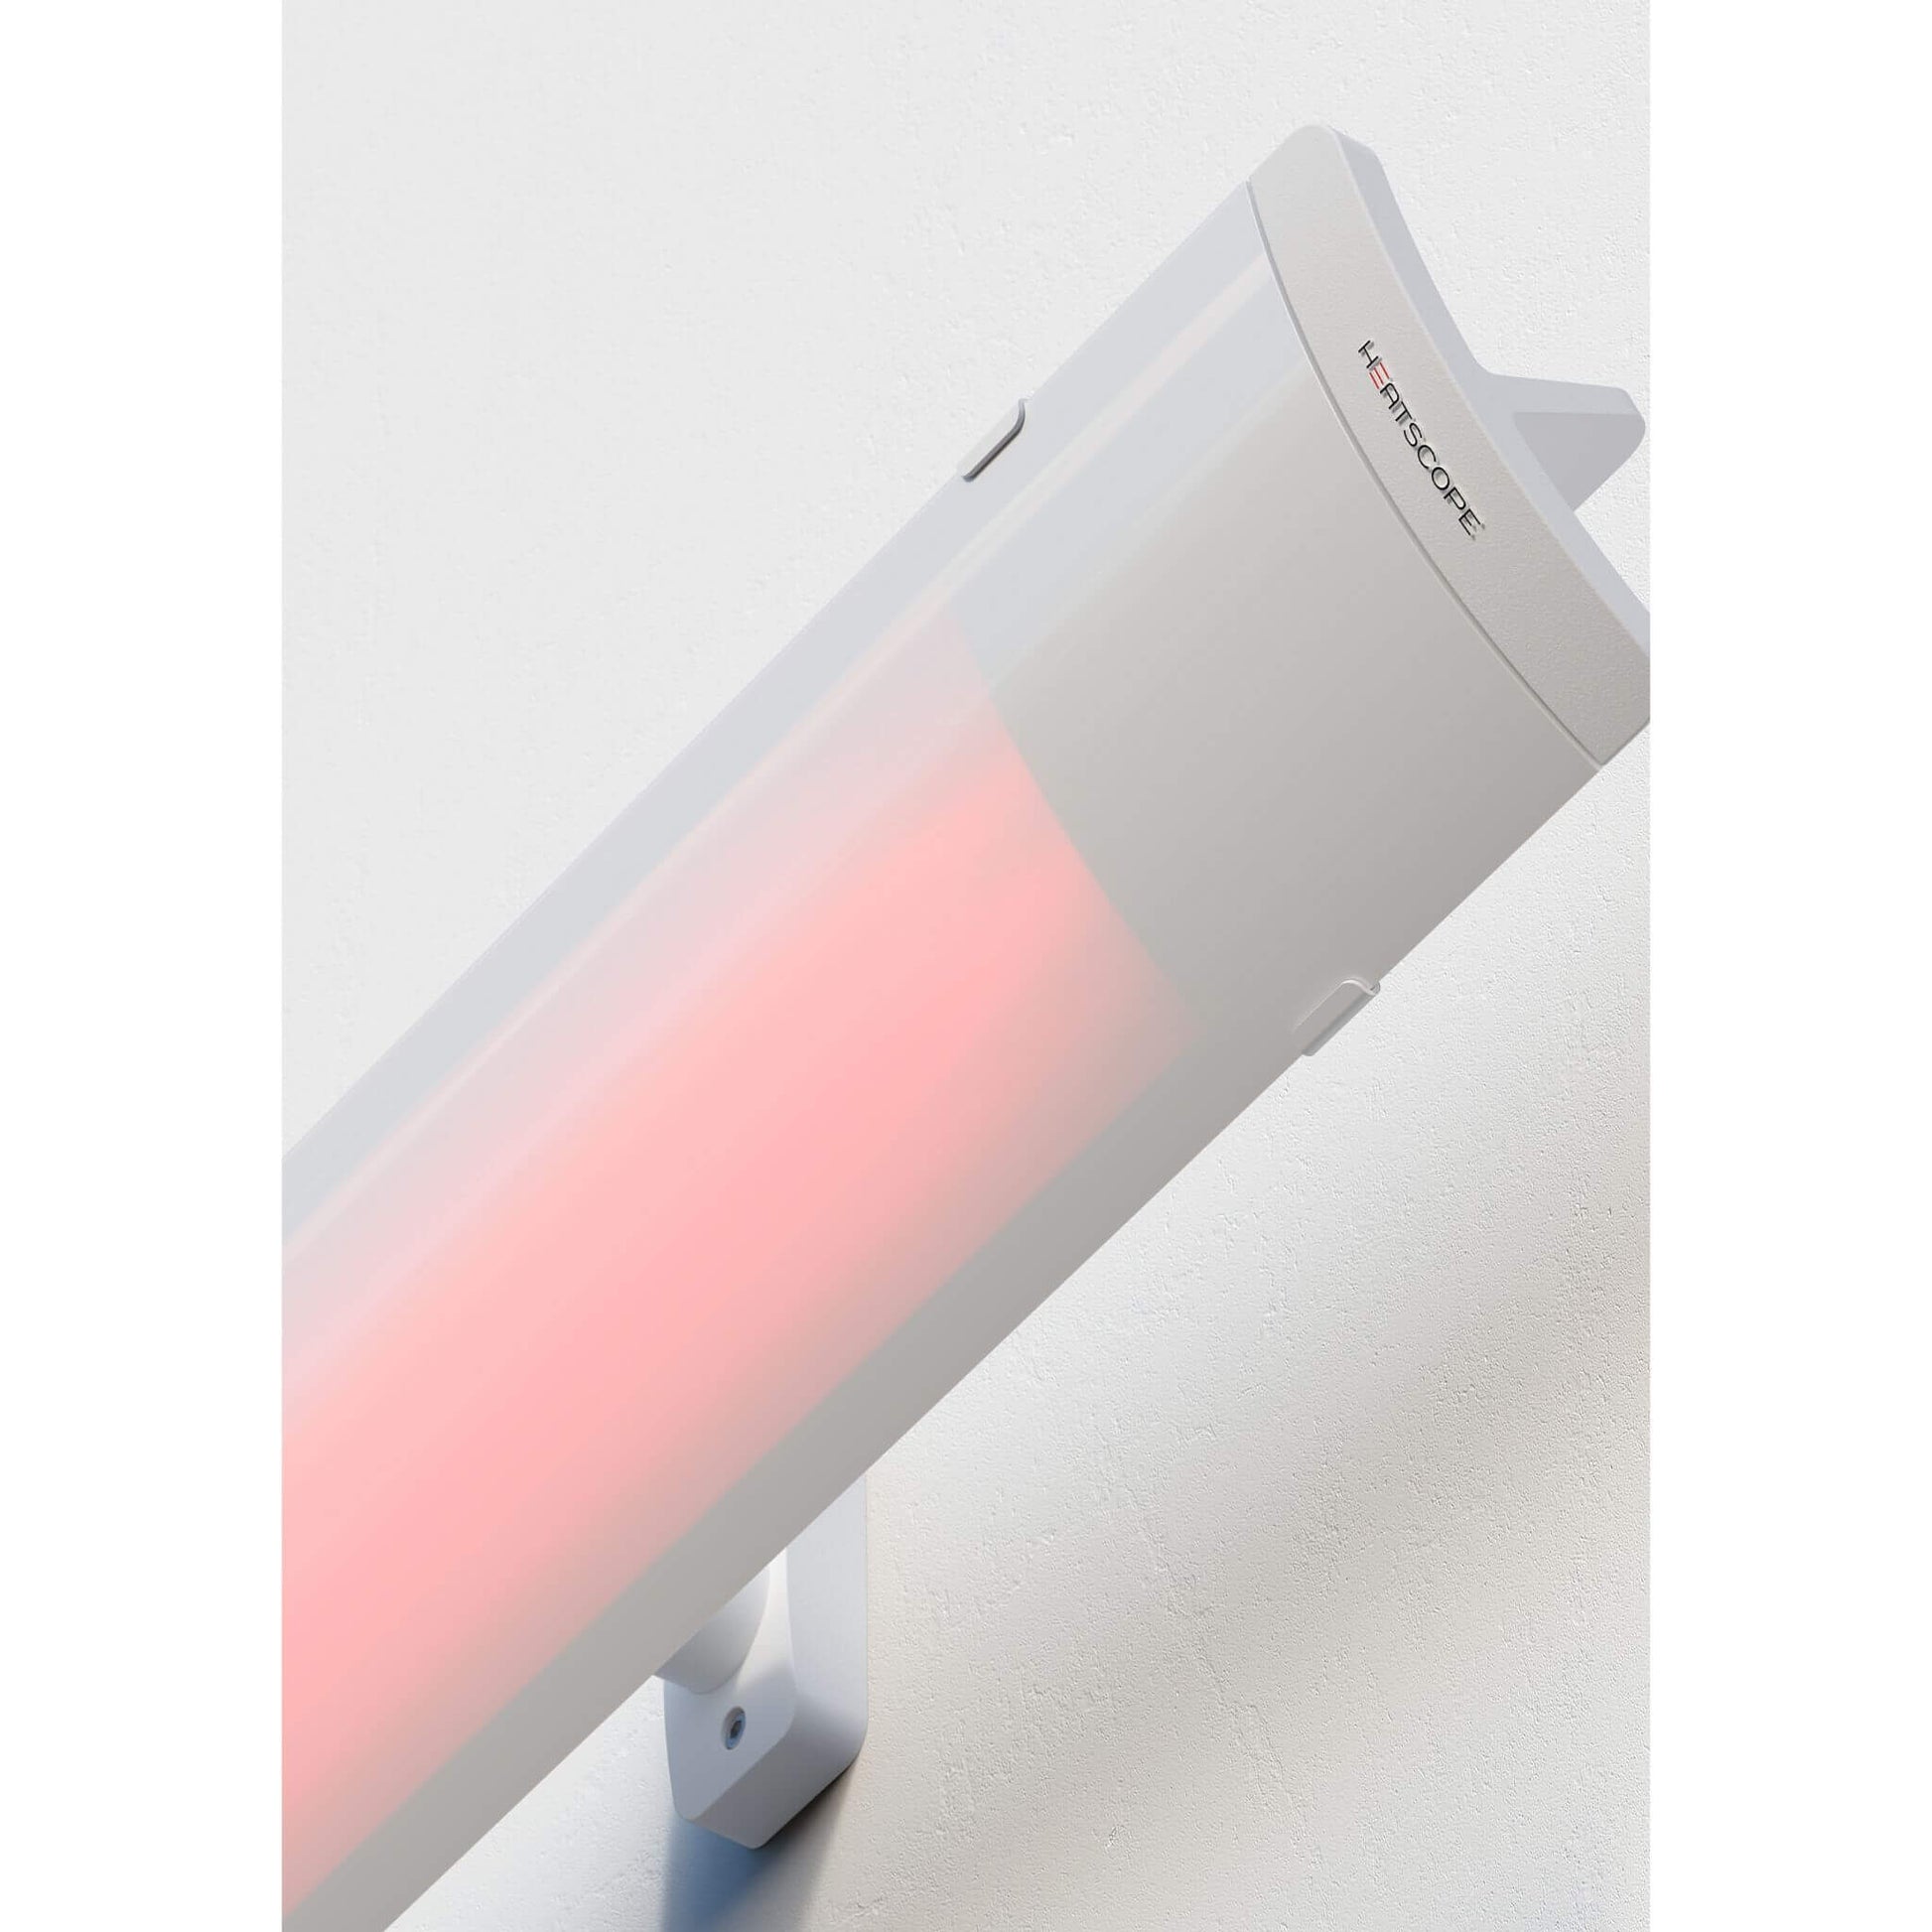 Heatscope Pure radiant heater in white - close up of infrared panels with wall mounted parts